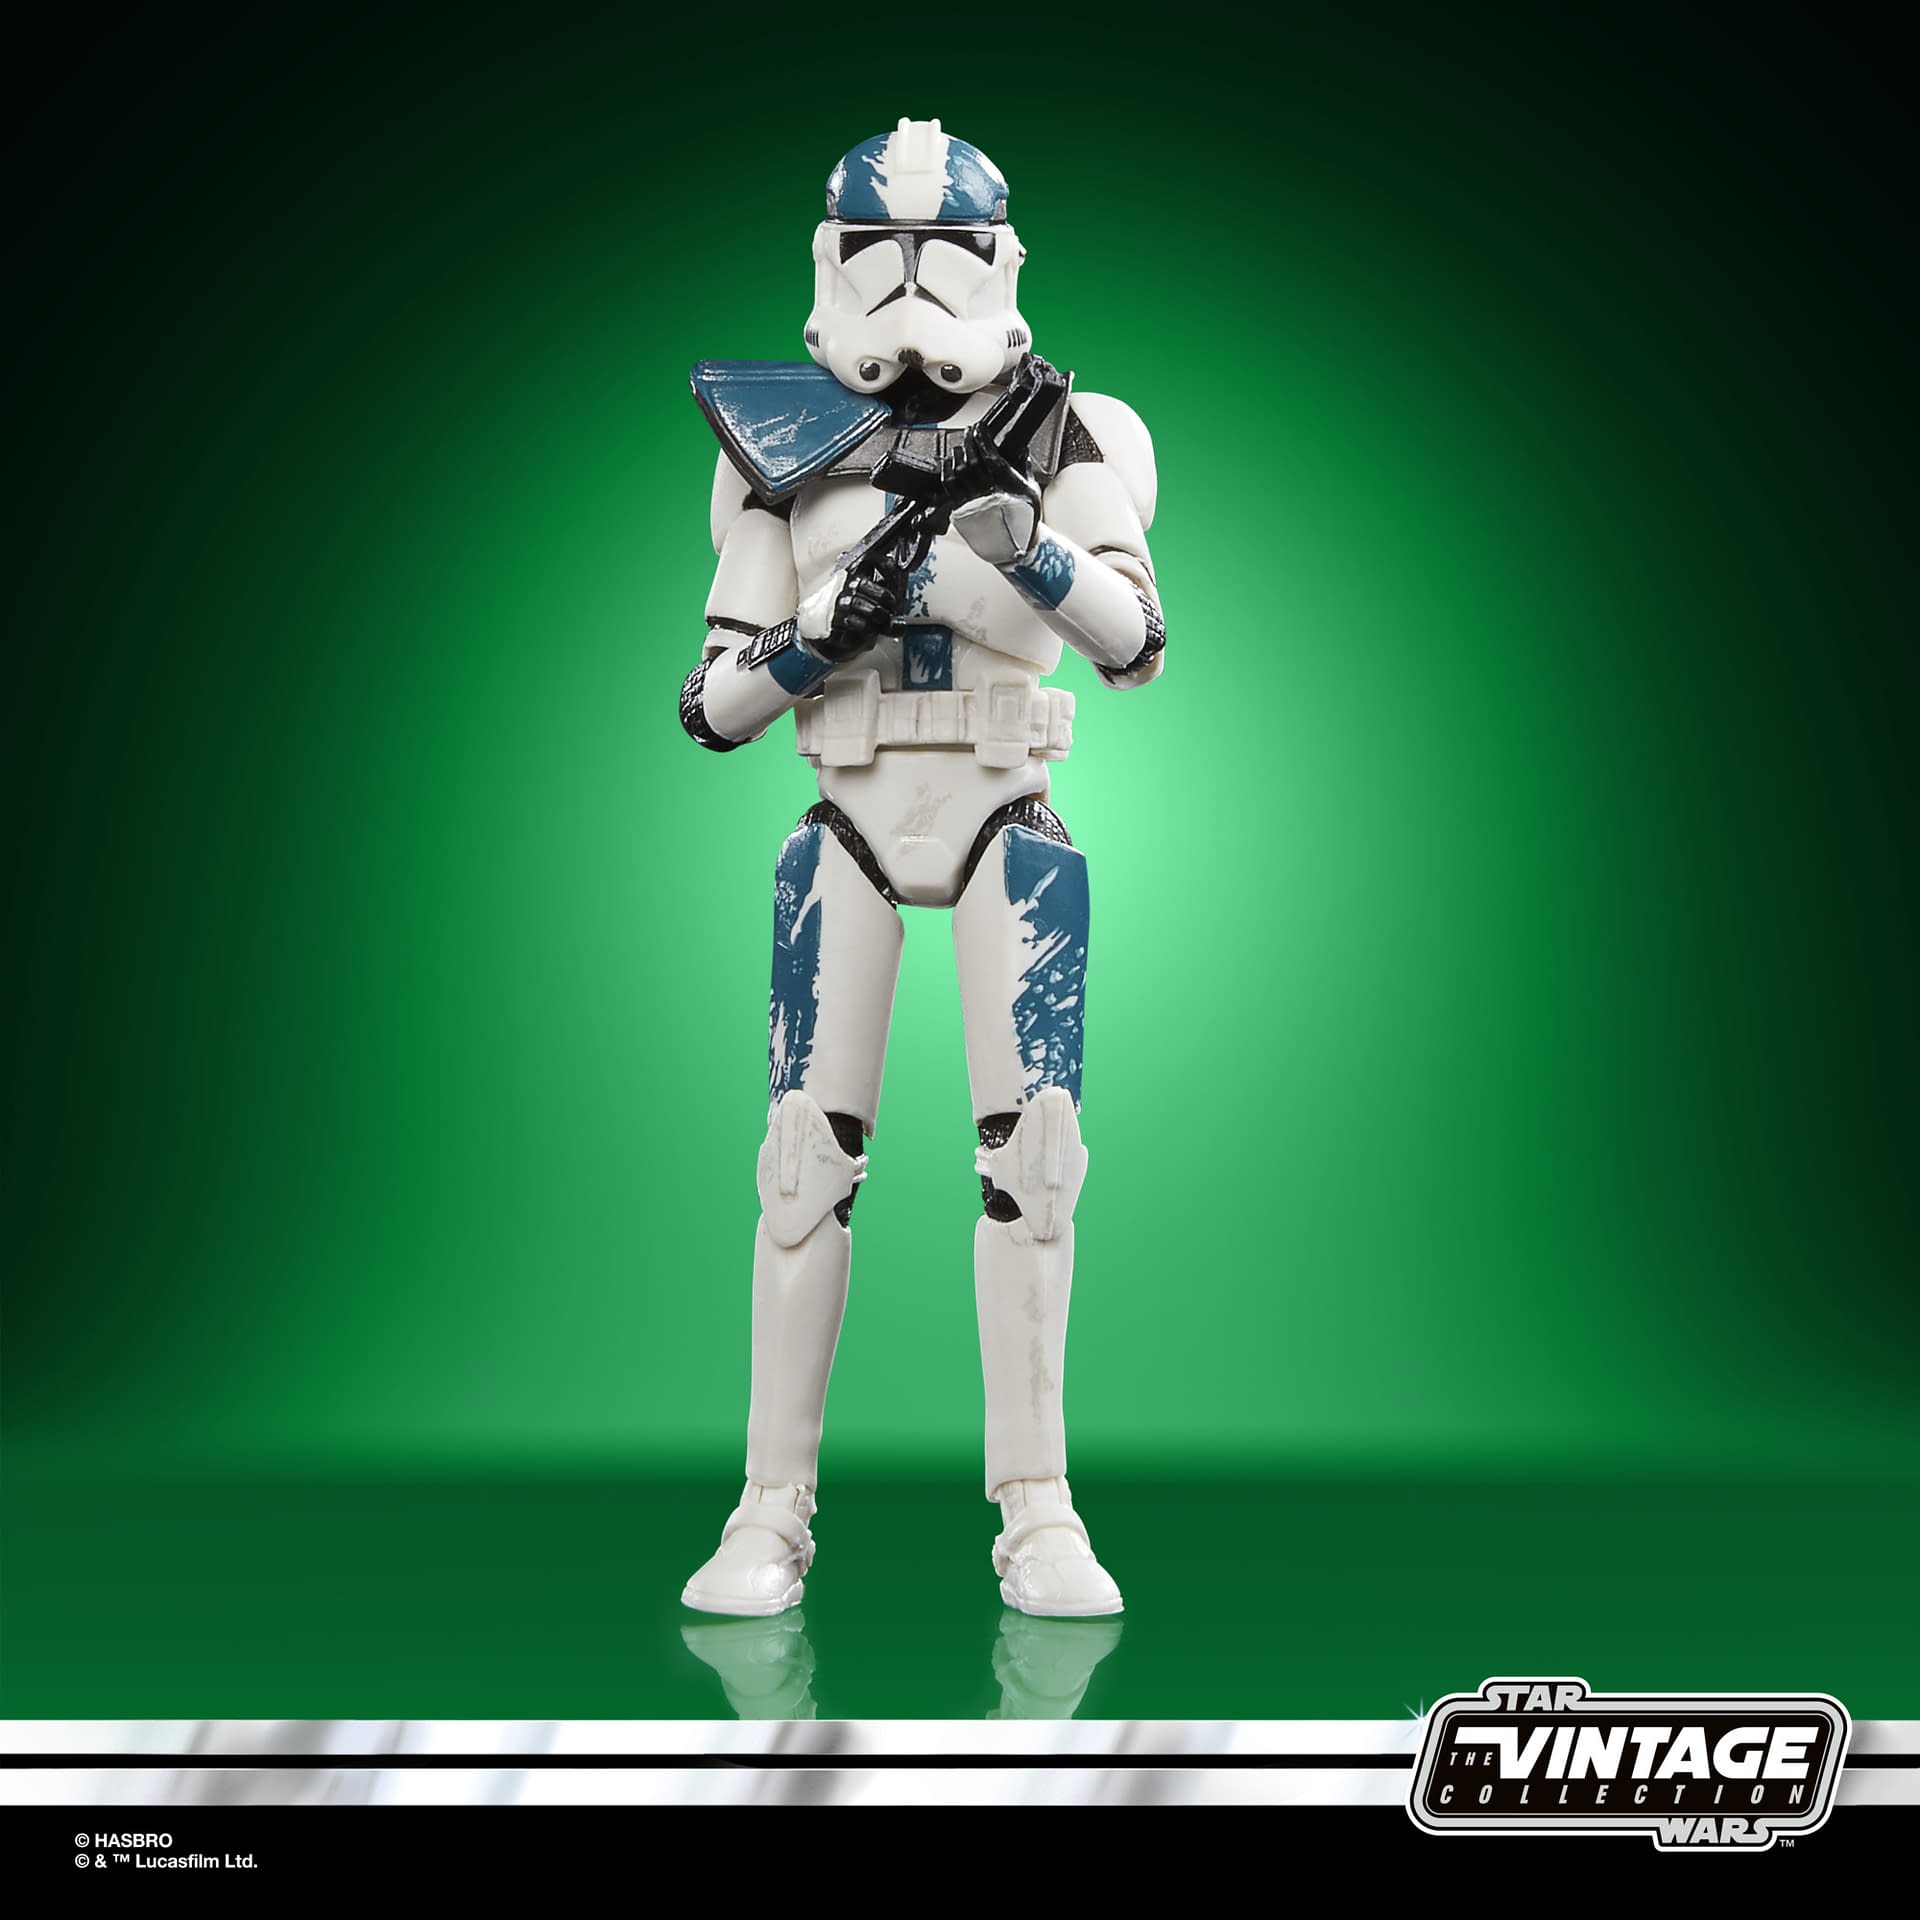 New Star Wars Clone Troopers Figures Coming Soon from Hasbro 